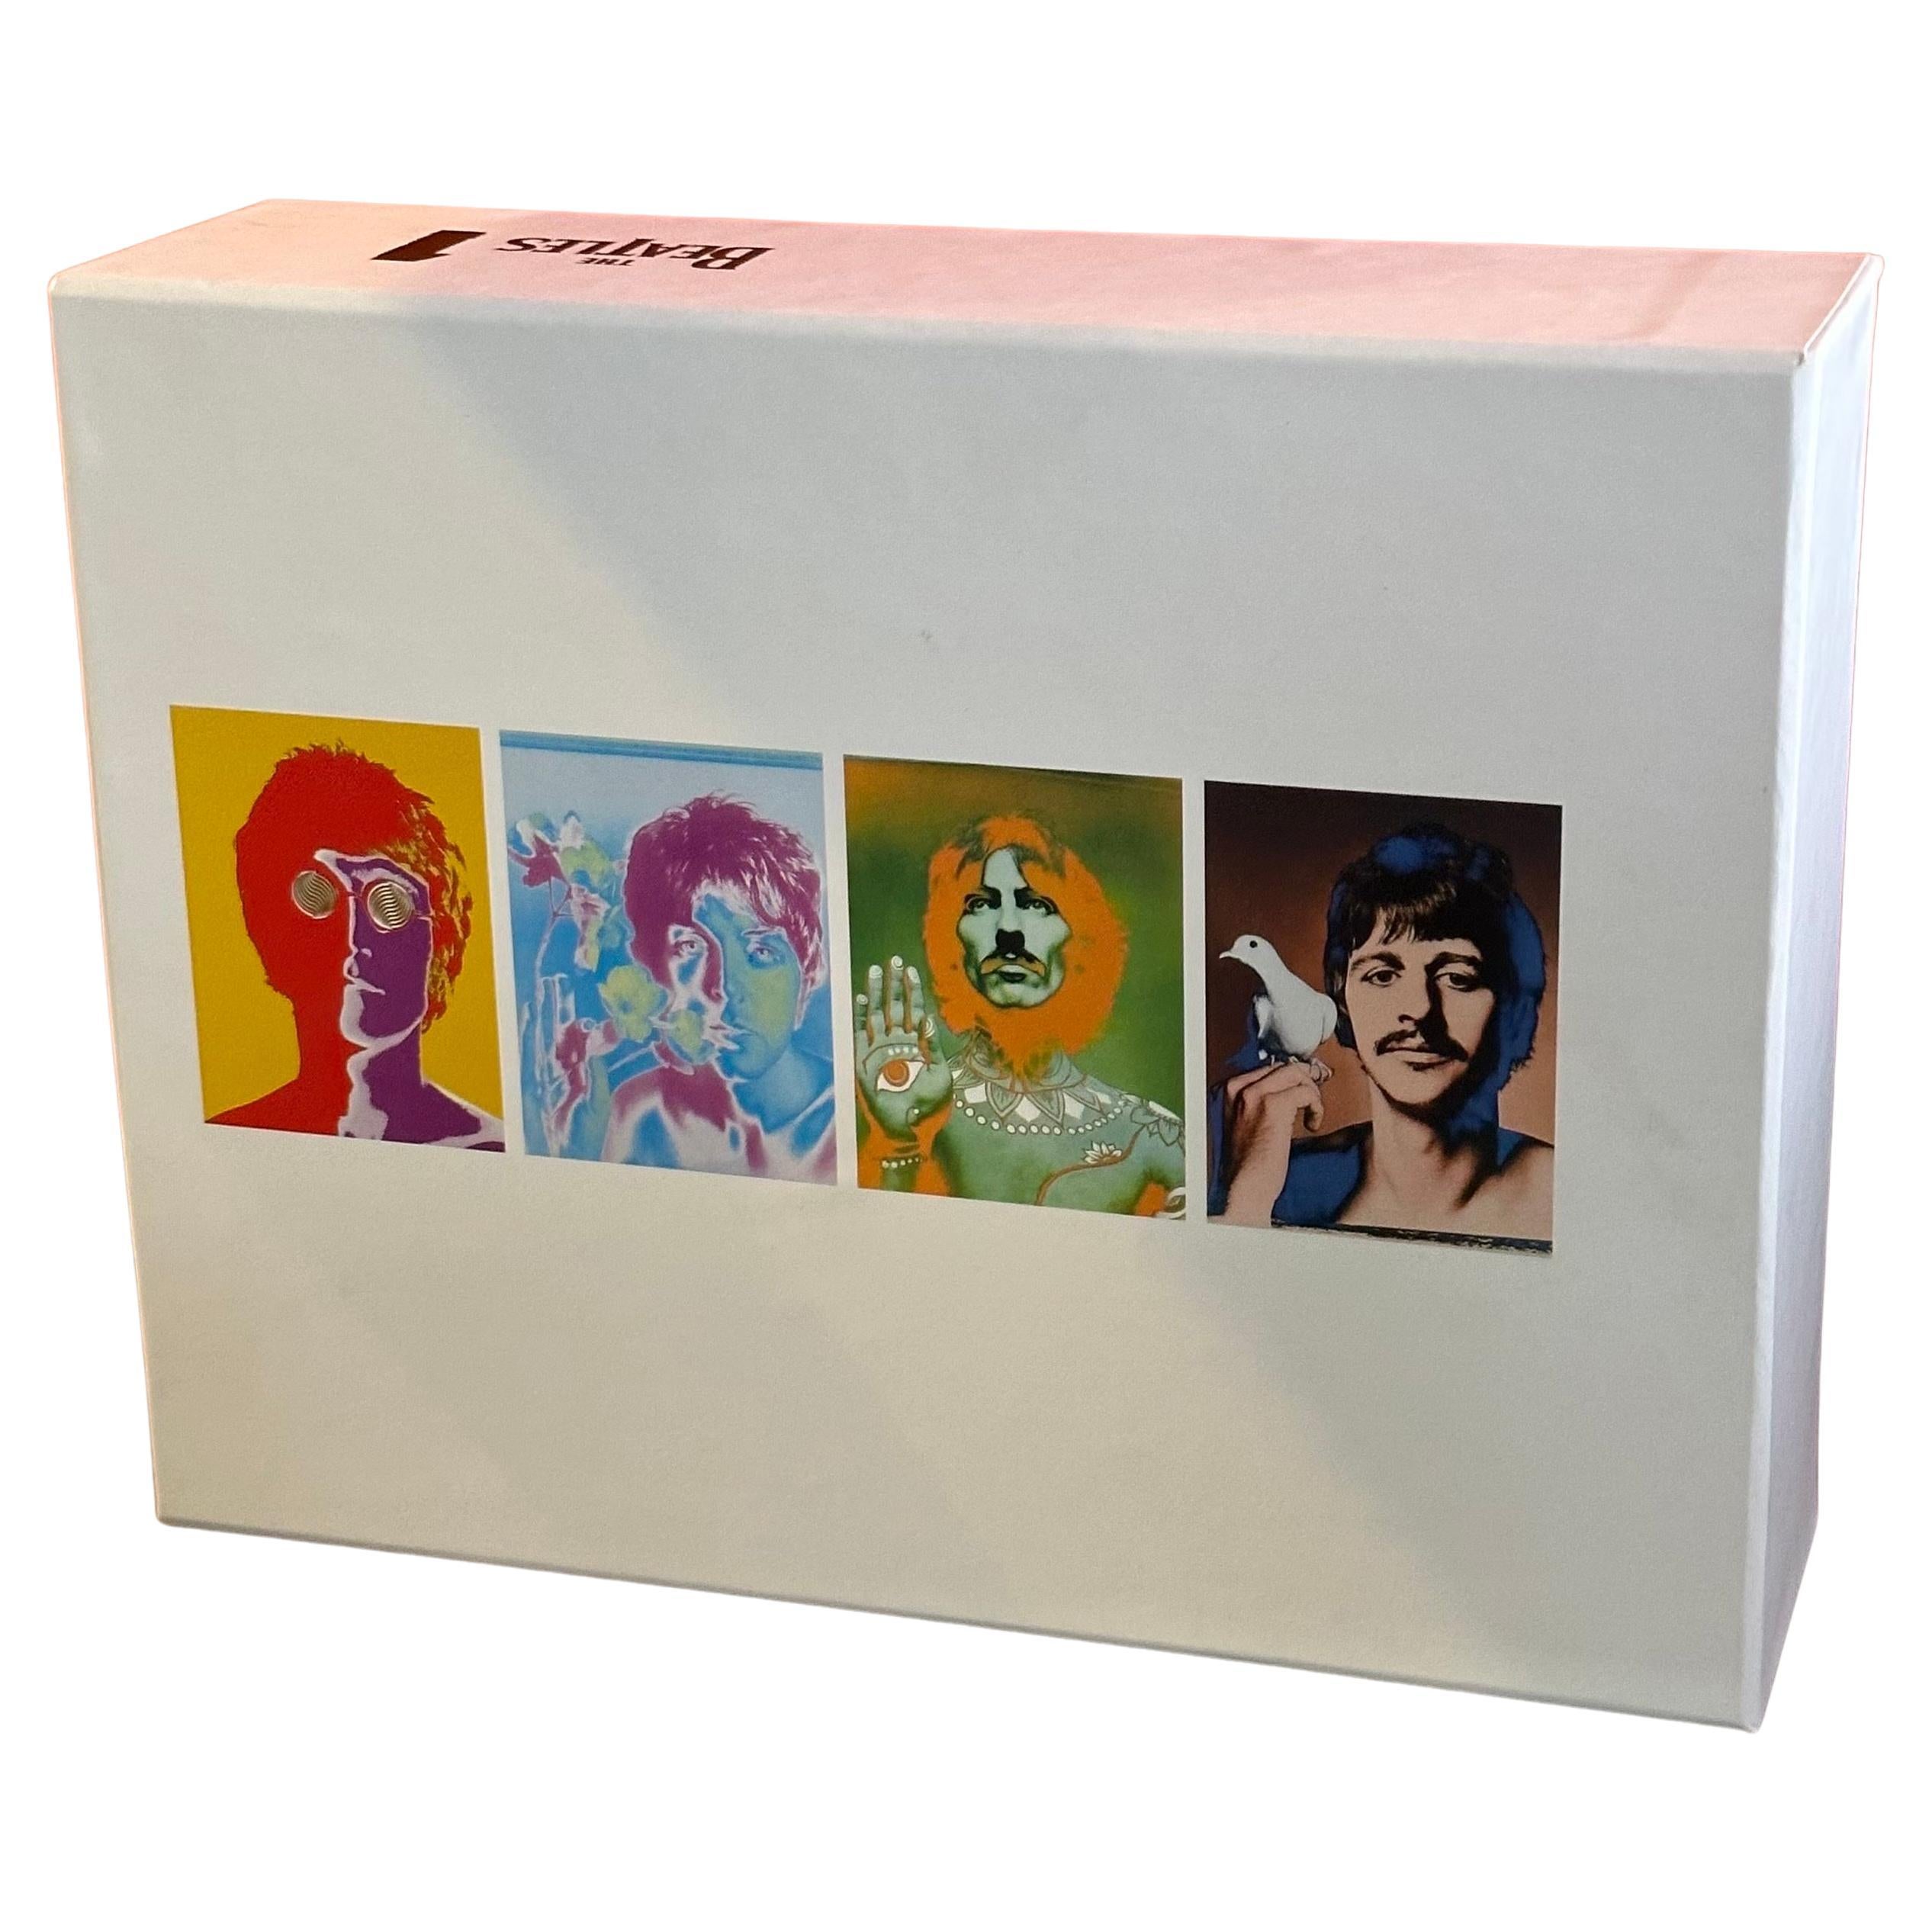 A hard to find set of four psychedelic Beatles t-shirts in box by Richard Avedon, circa 2000s.  The shirts are 100% cotton, size large and are in brand new unused condition.  Each shirt features a different Beatle and uses the images that Avedon